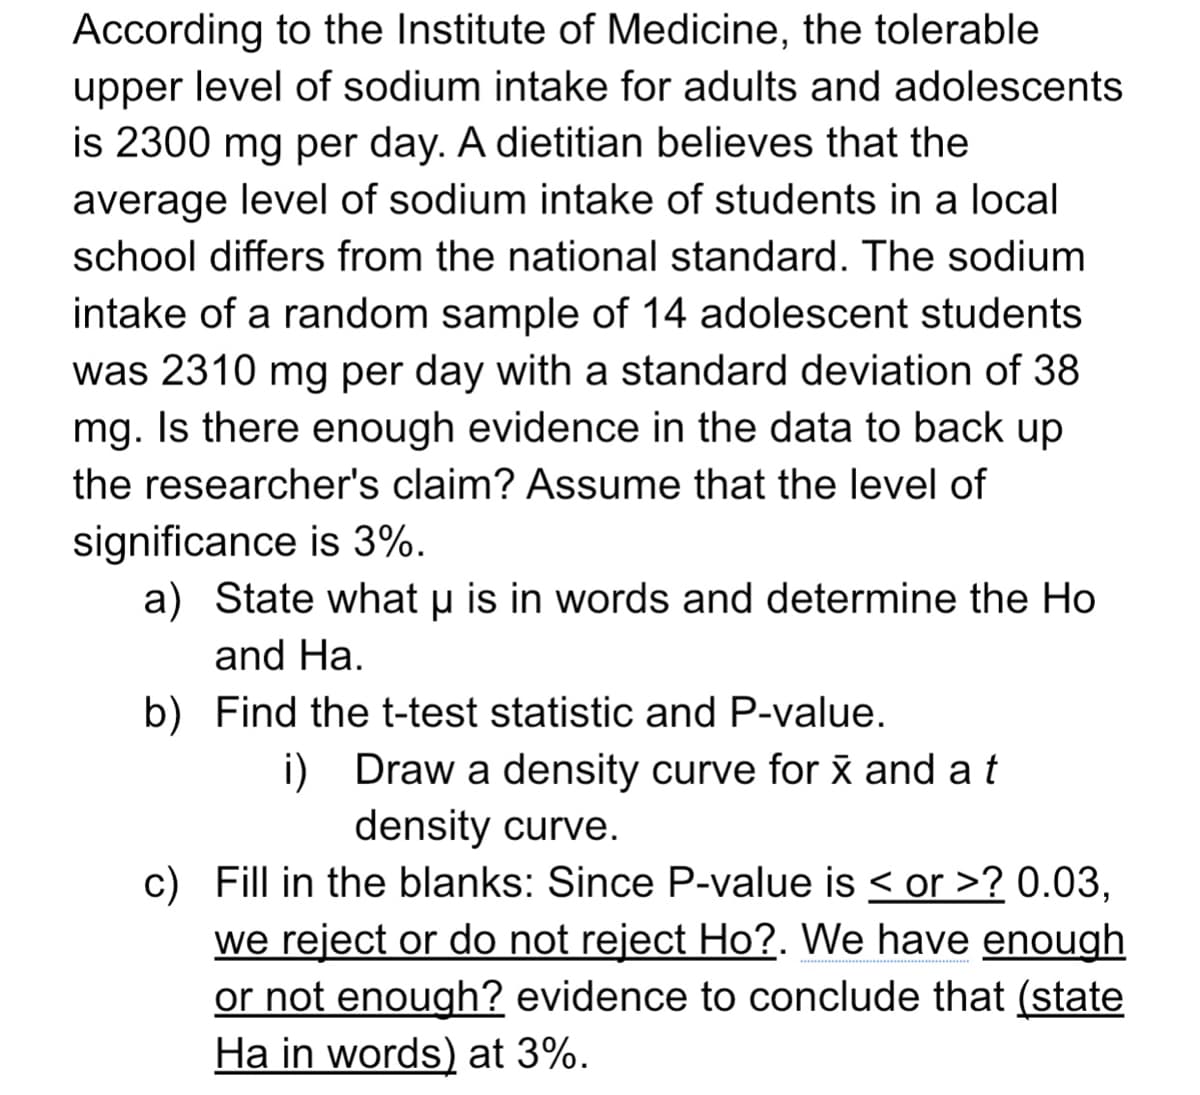 According to the Institute of Medicine, the tolerable
upper level of sodium intake for adults and adolescents
is 2300 mg per day. A dietitian believes that the
average level of sodium intake of students in a local
school differs from the national standard. The sodium
intake of a random sample of 14 adolescent students
was 2310 mg per day with a standard deviation of 38
mg. Is there enough evidence in the data to back up
the researcher's claim? Assume that the level of
significance is 3%.
a) State what u is in words and determine the Ho
and Ha.
b) Find the t-test statistic and P-value.
i) Draw a density curve for x and a t
density curve.
c) Fill in the blanks: Since P-value is < or >? 0.03,
we reject or do not reject Ho?. We have enough
or not enough? evidence to conclude that (state
Ha in words) at 3%.
